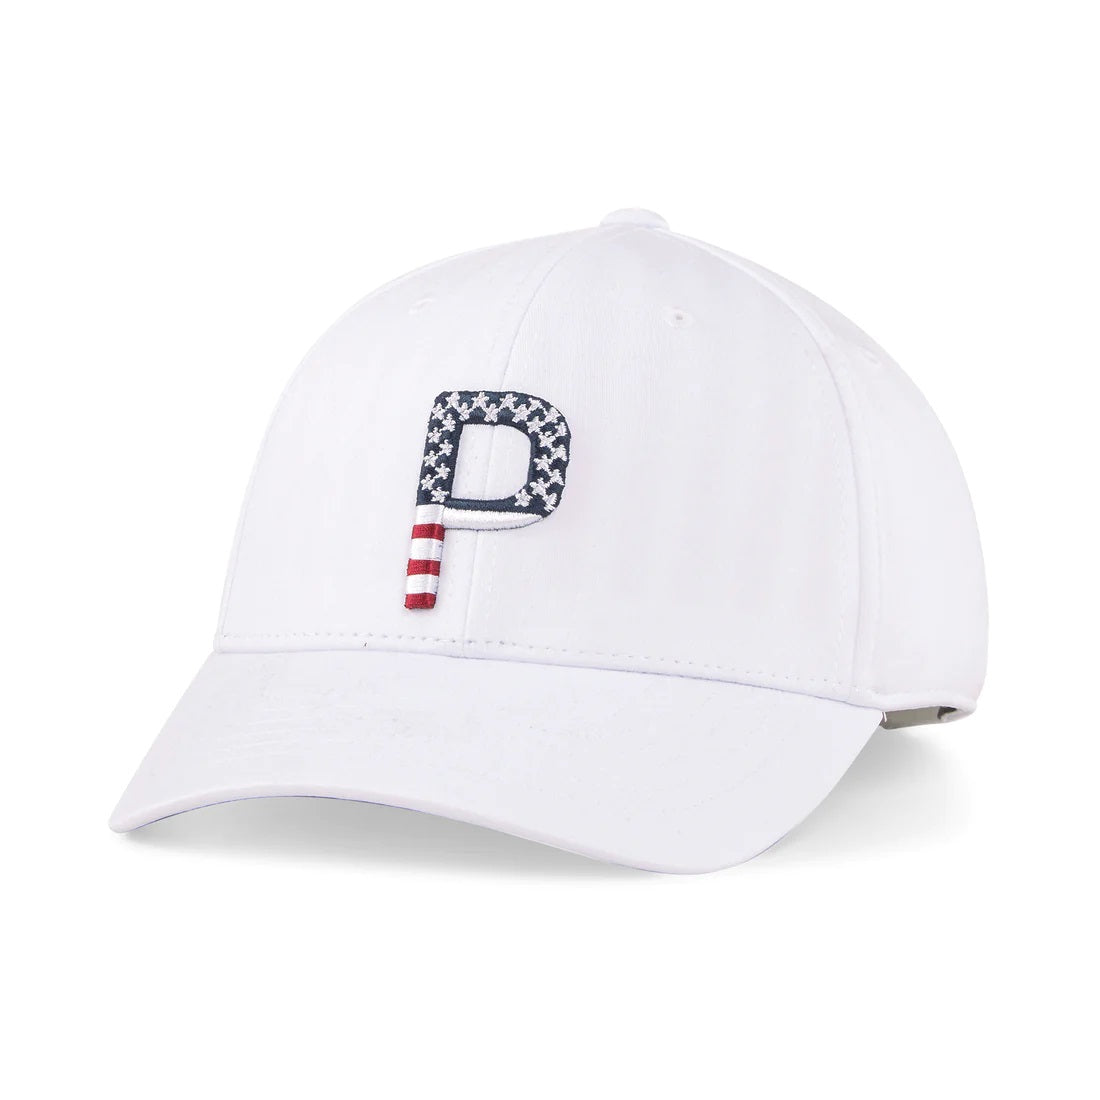 Puma Pars And Stripes P Classic Adjustable Hat Bright White (On-Sale)